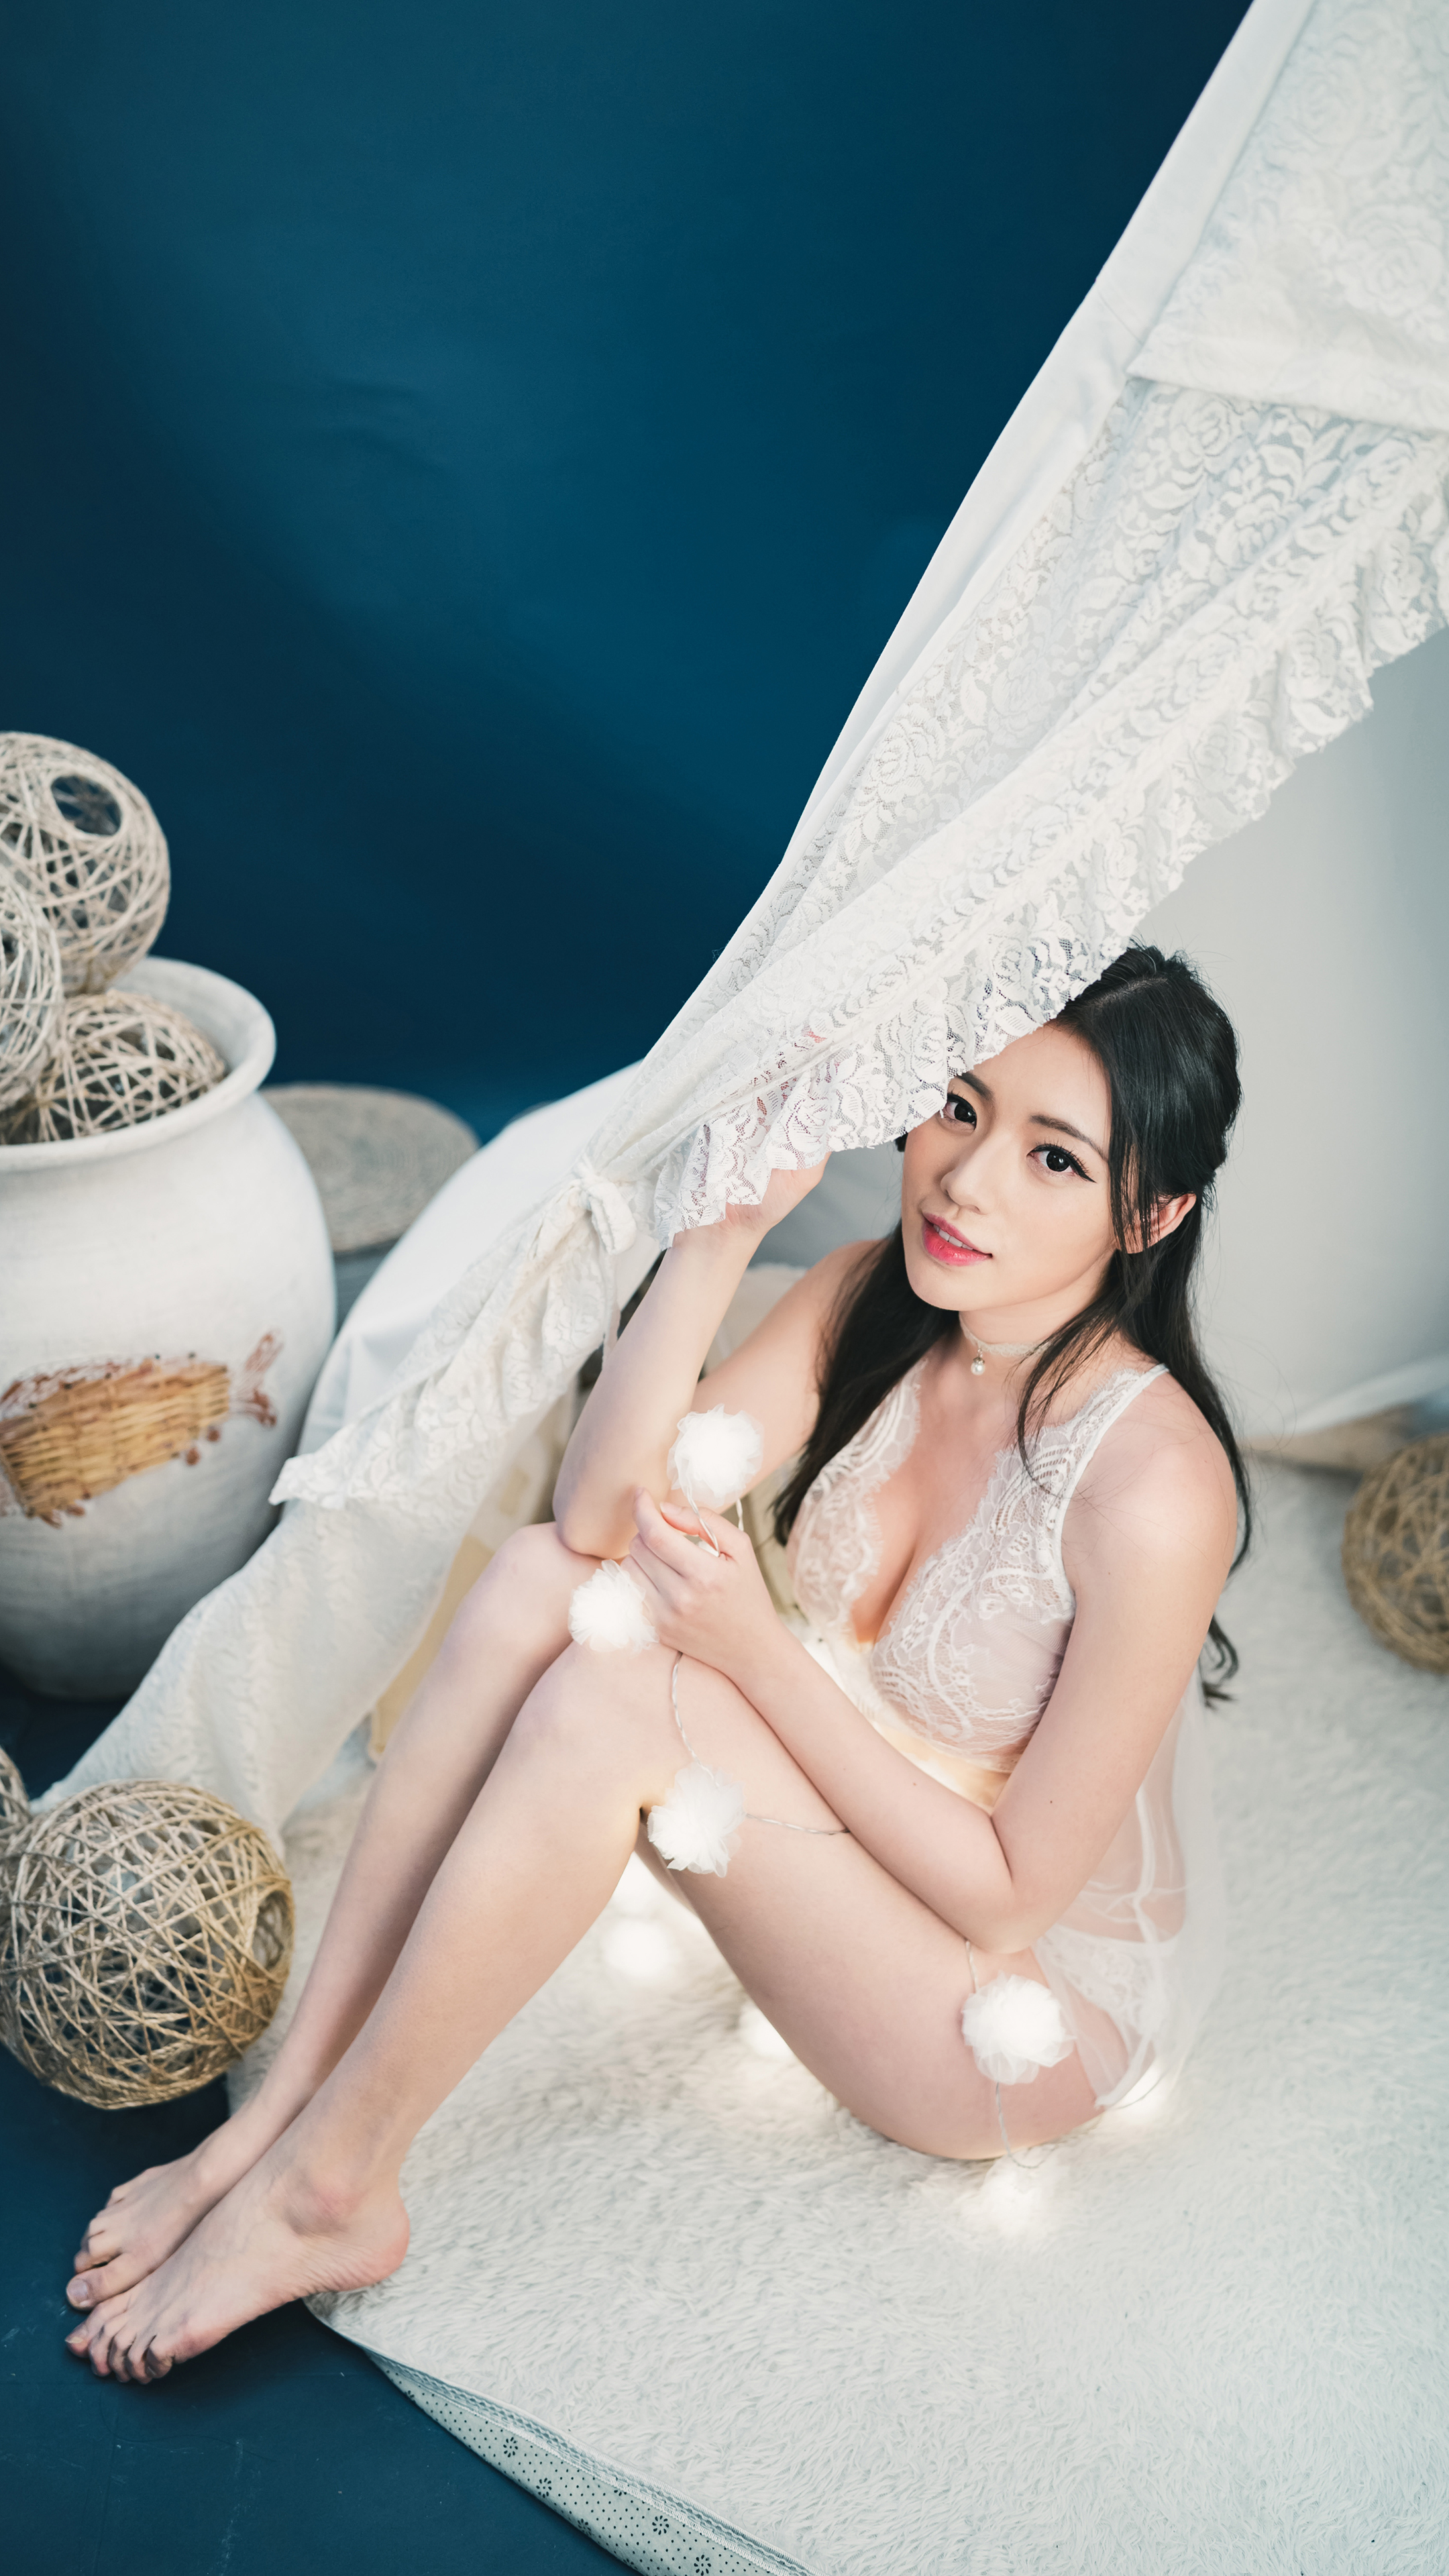 People 2160x3840 Kiki Hsieh women Asian model brunette lace teddy cleavage high angle barefoot looking at viewer women indoors portrait display